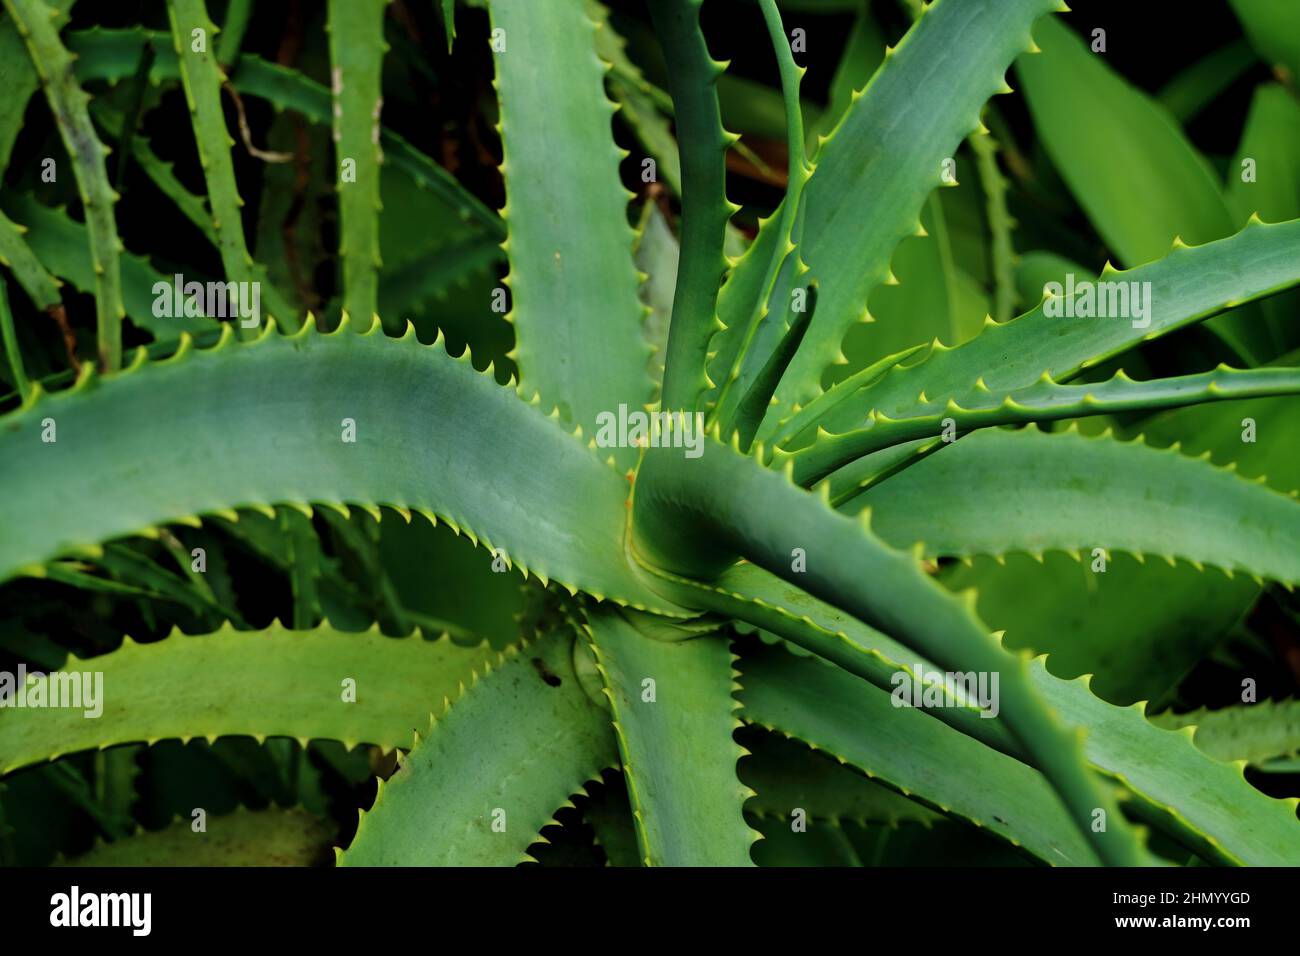 Spiky Agave Plant As Natural Texture Background Stock Photo